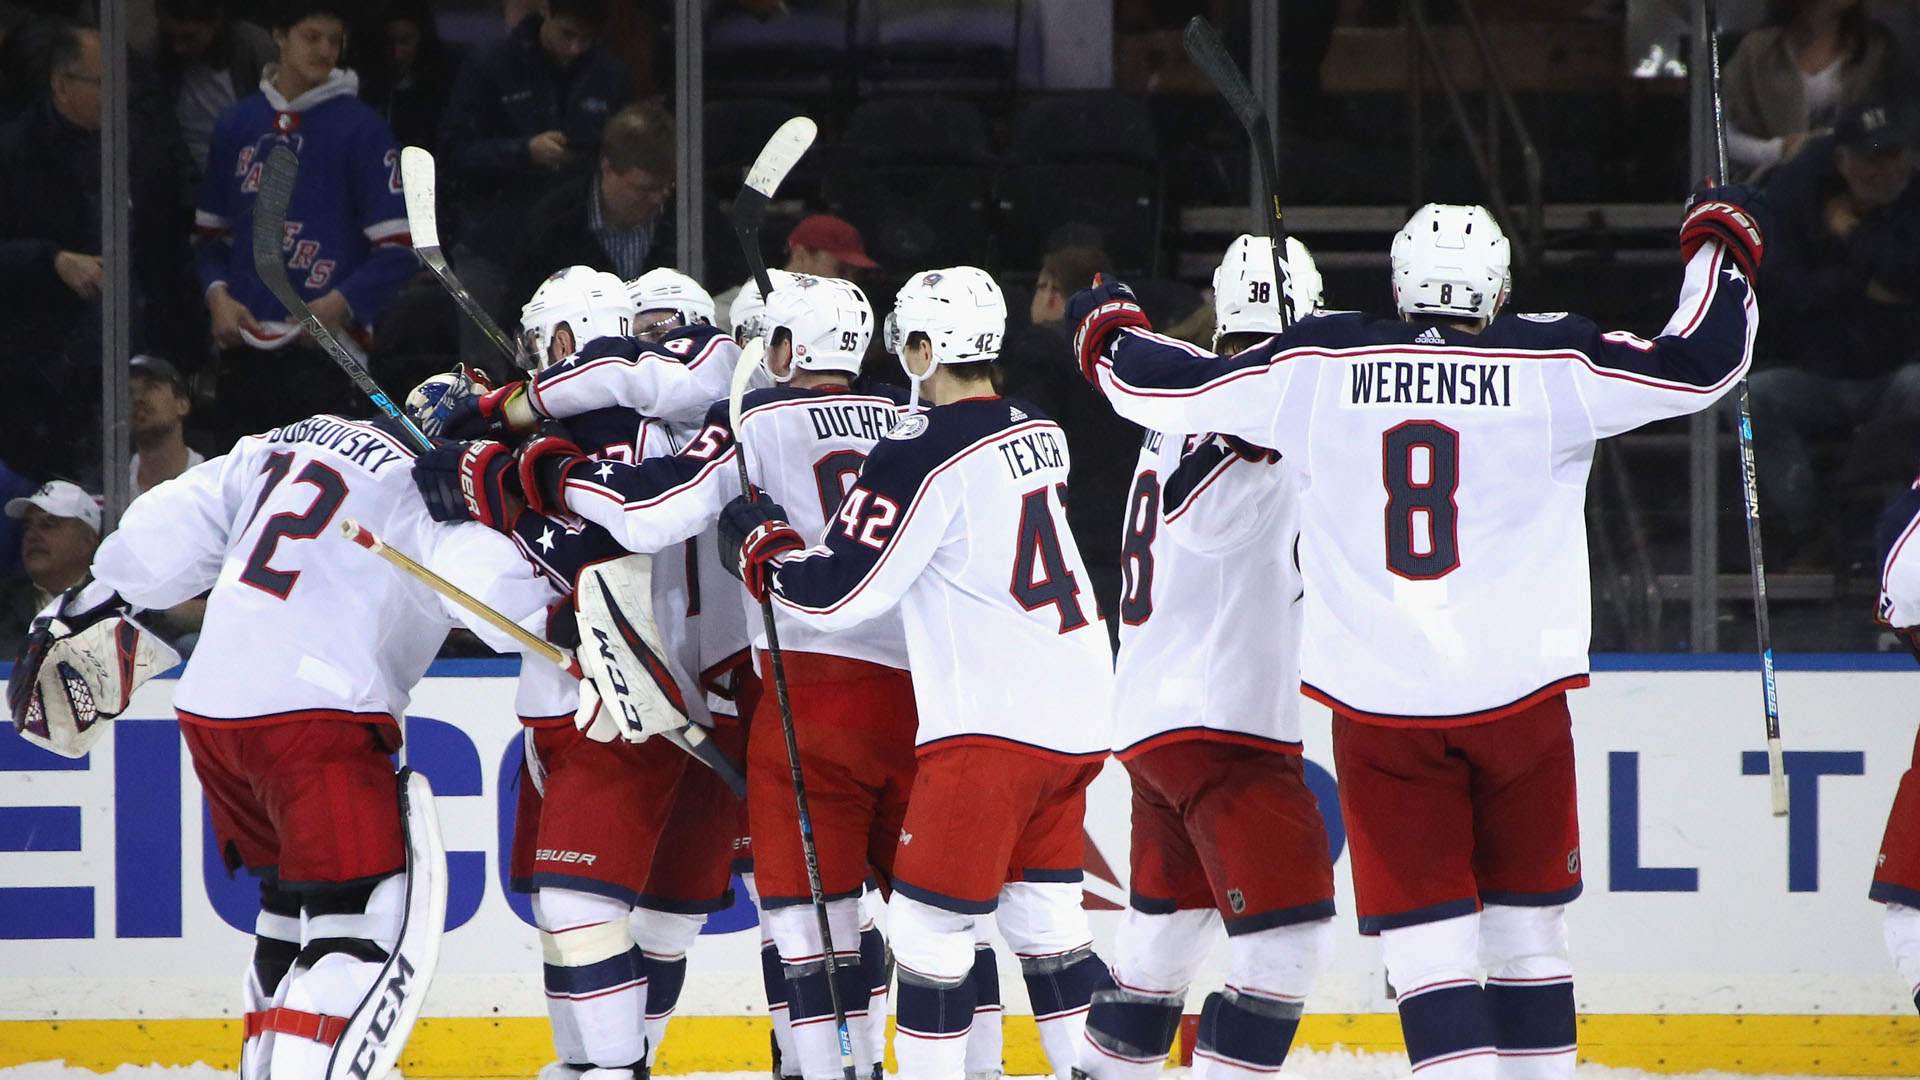 The Blue Jackets Celebrate Locking Up A Playoff Spot - College Ice Hockey - HD Wallpaper 